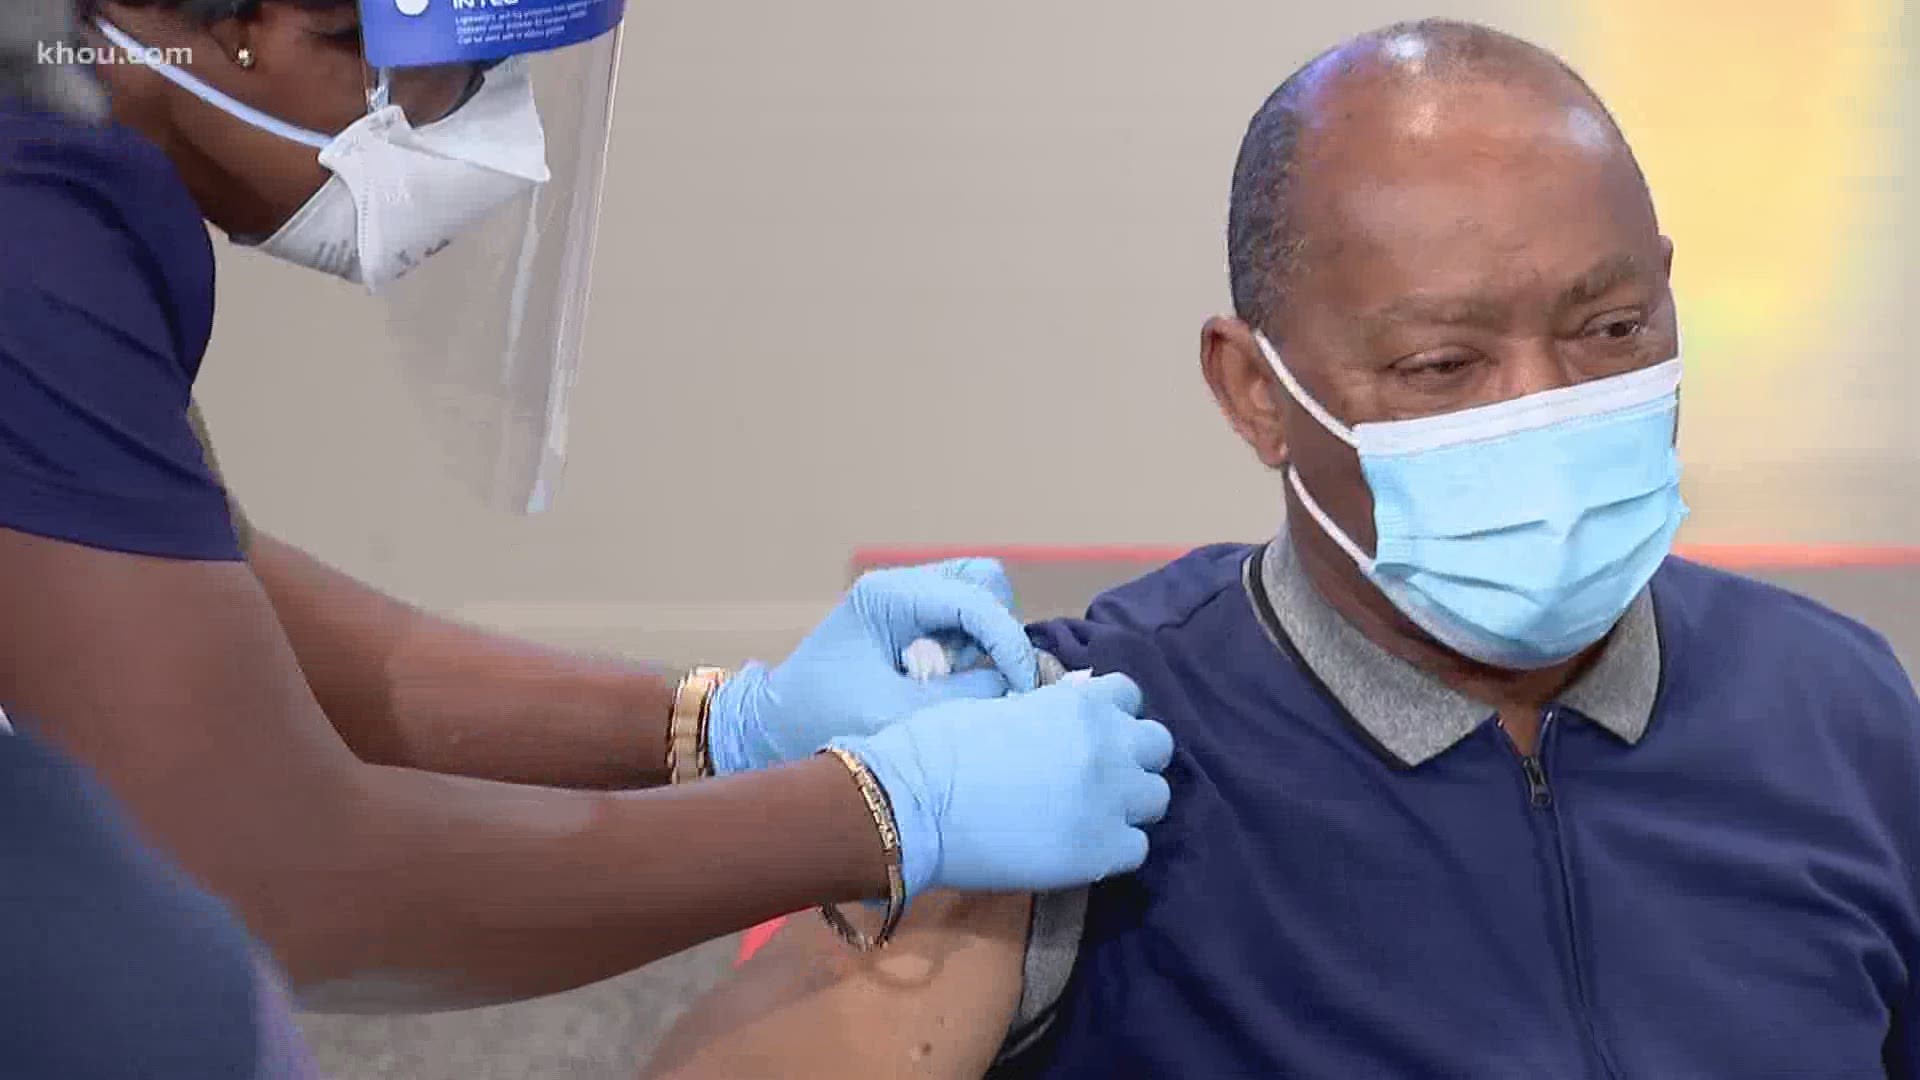 Houston Mayor Sylvester Turner gets his first dose of the Moderna COVID-19 vaccine on Monday, Jan. 4, 2021.